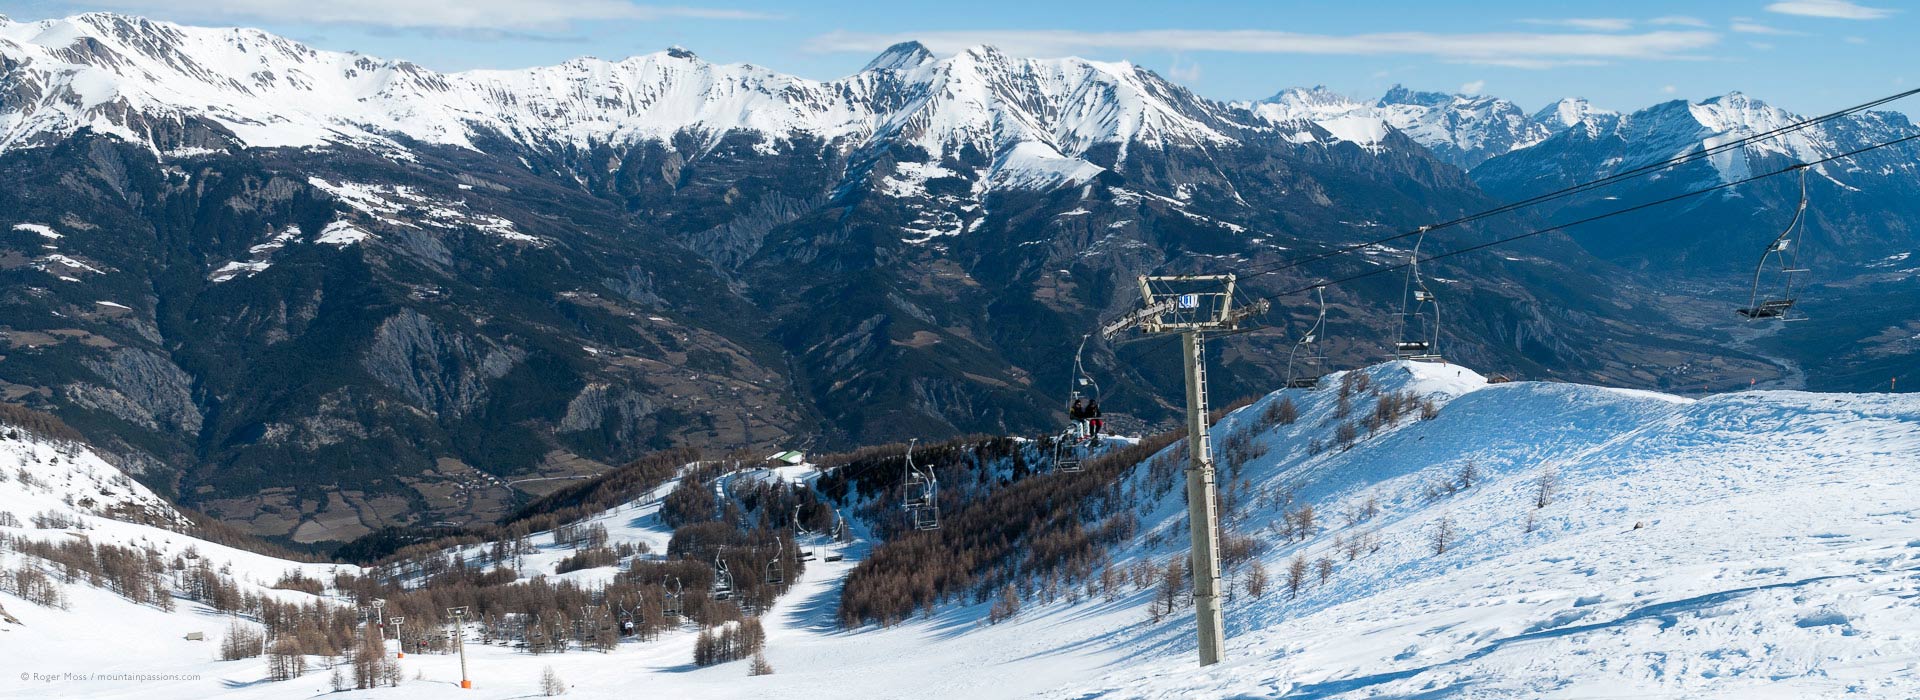 High, wide view of ski lift on mountainside with surrounding valleys at Pra Loup